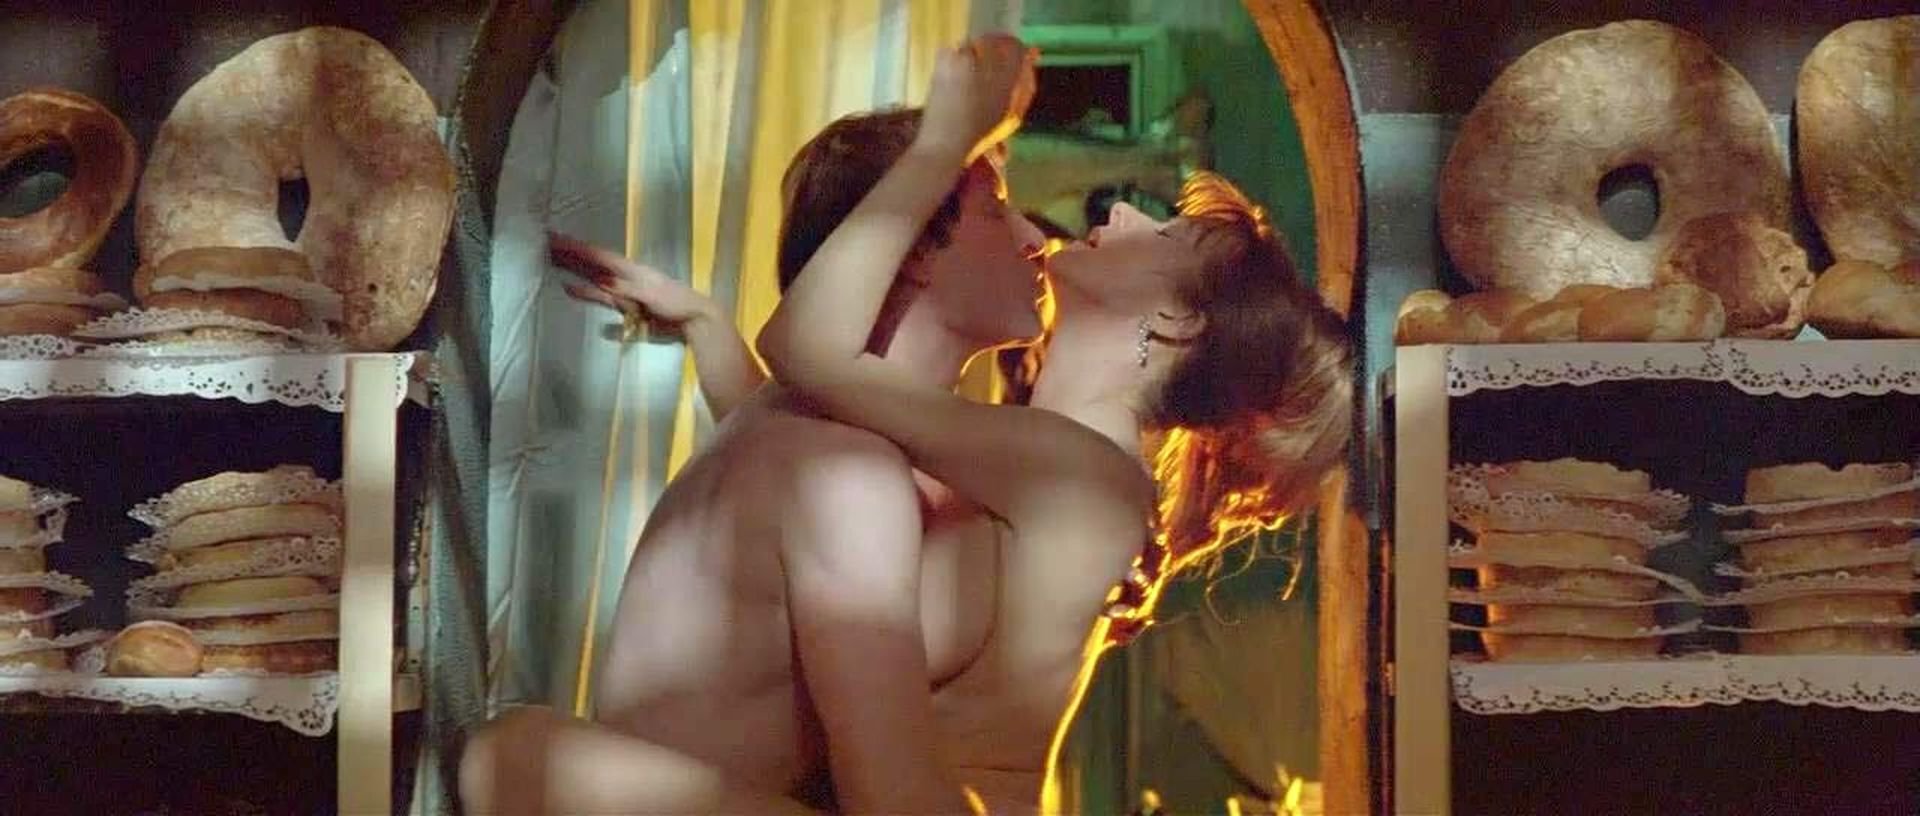 Helen Mirren Nude - The Cook, the Thief, His Wife  Her Lover (9 Pics + GIF  Video)